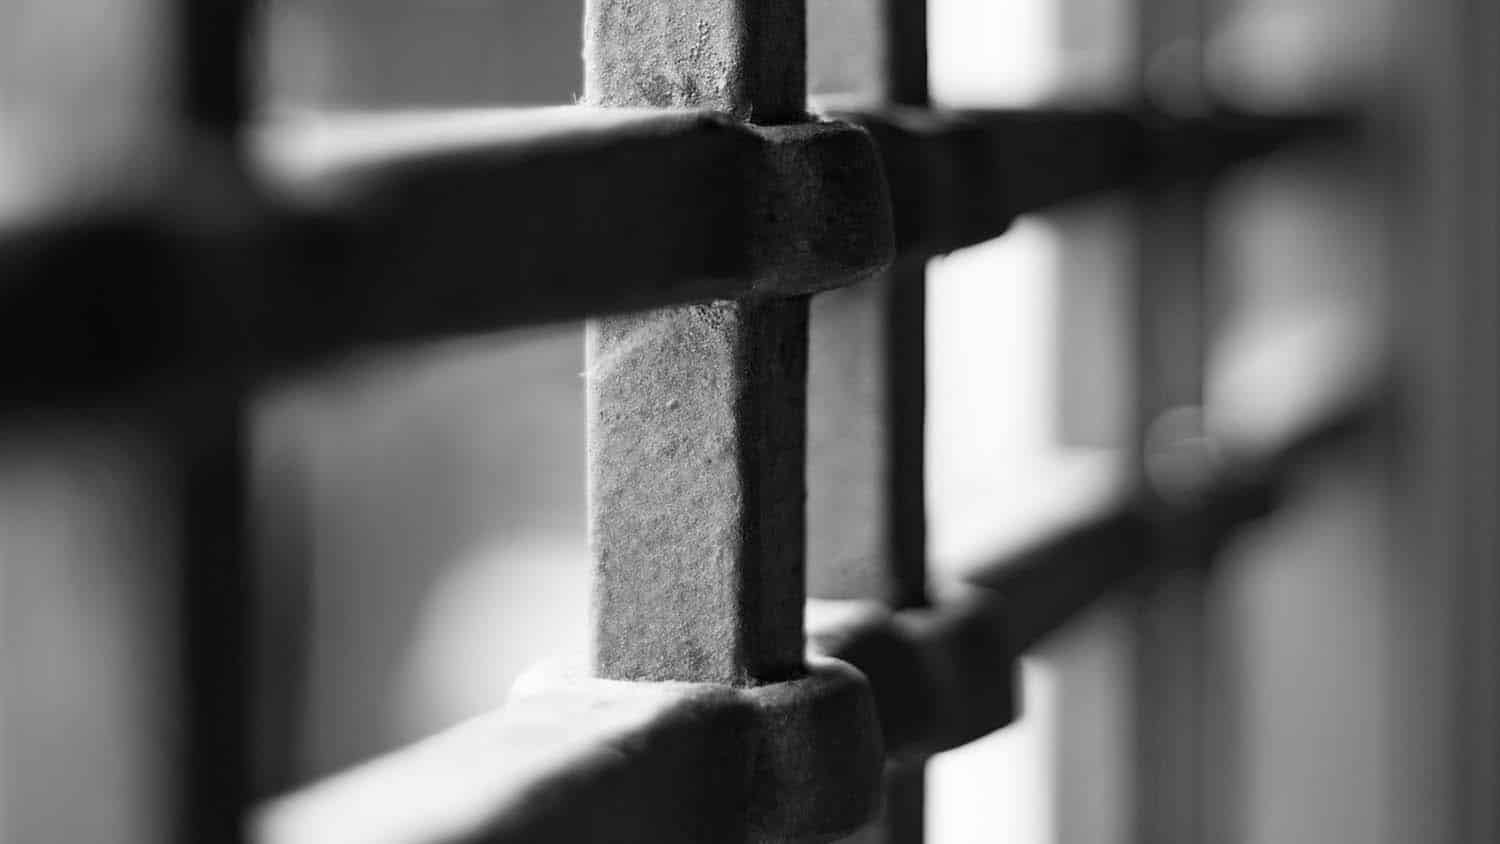 black and white photo shows the bars of a prison cell